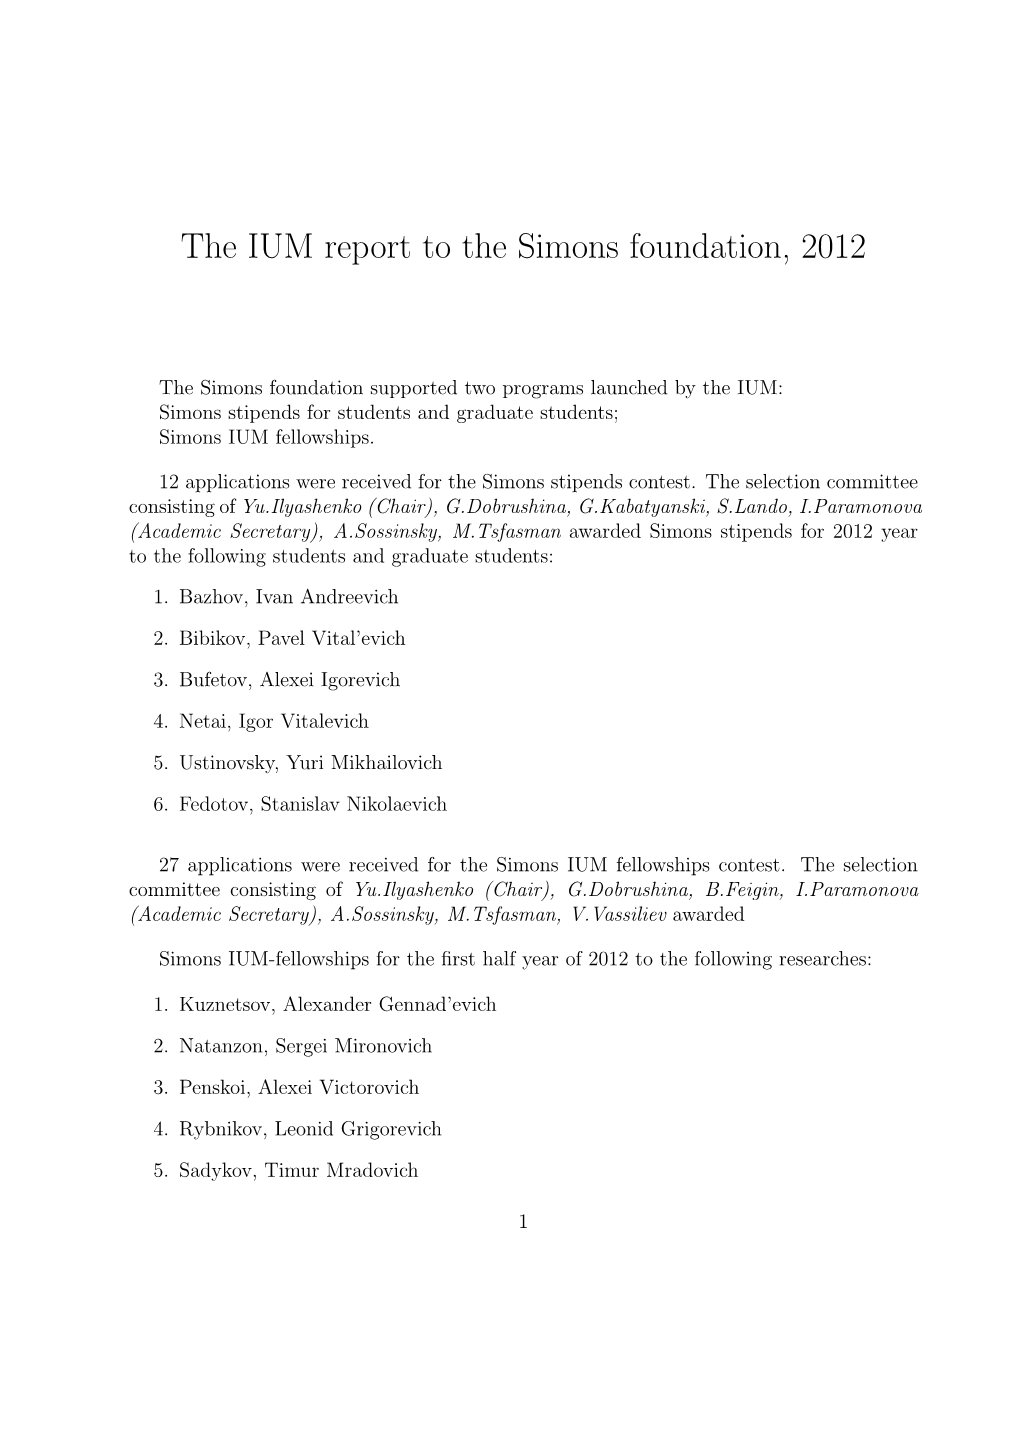 The IUM Report to the Simons Foundation, 2012